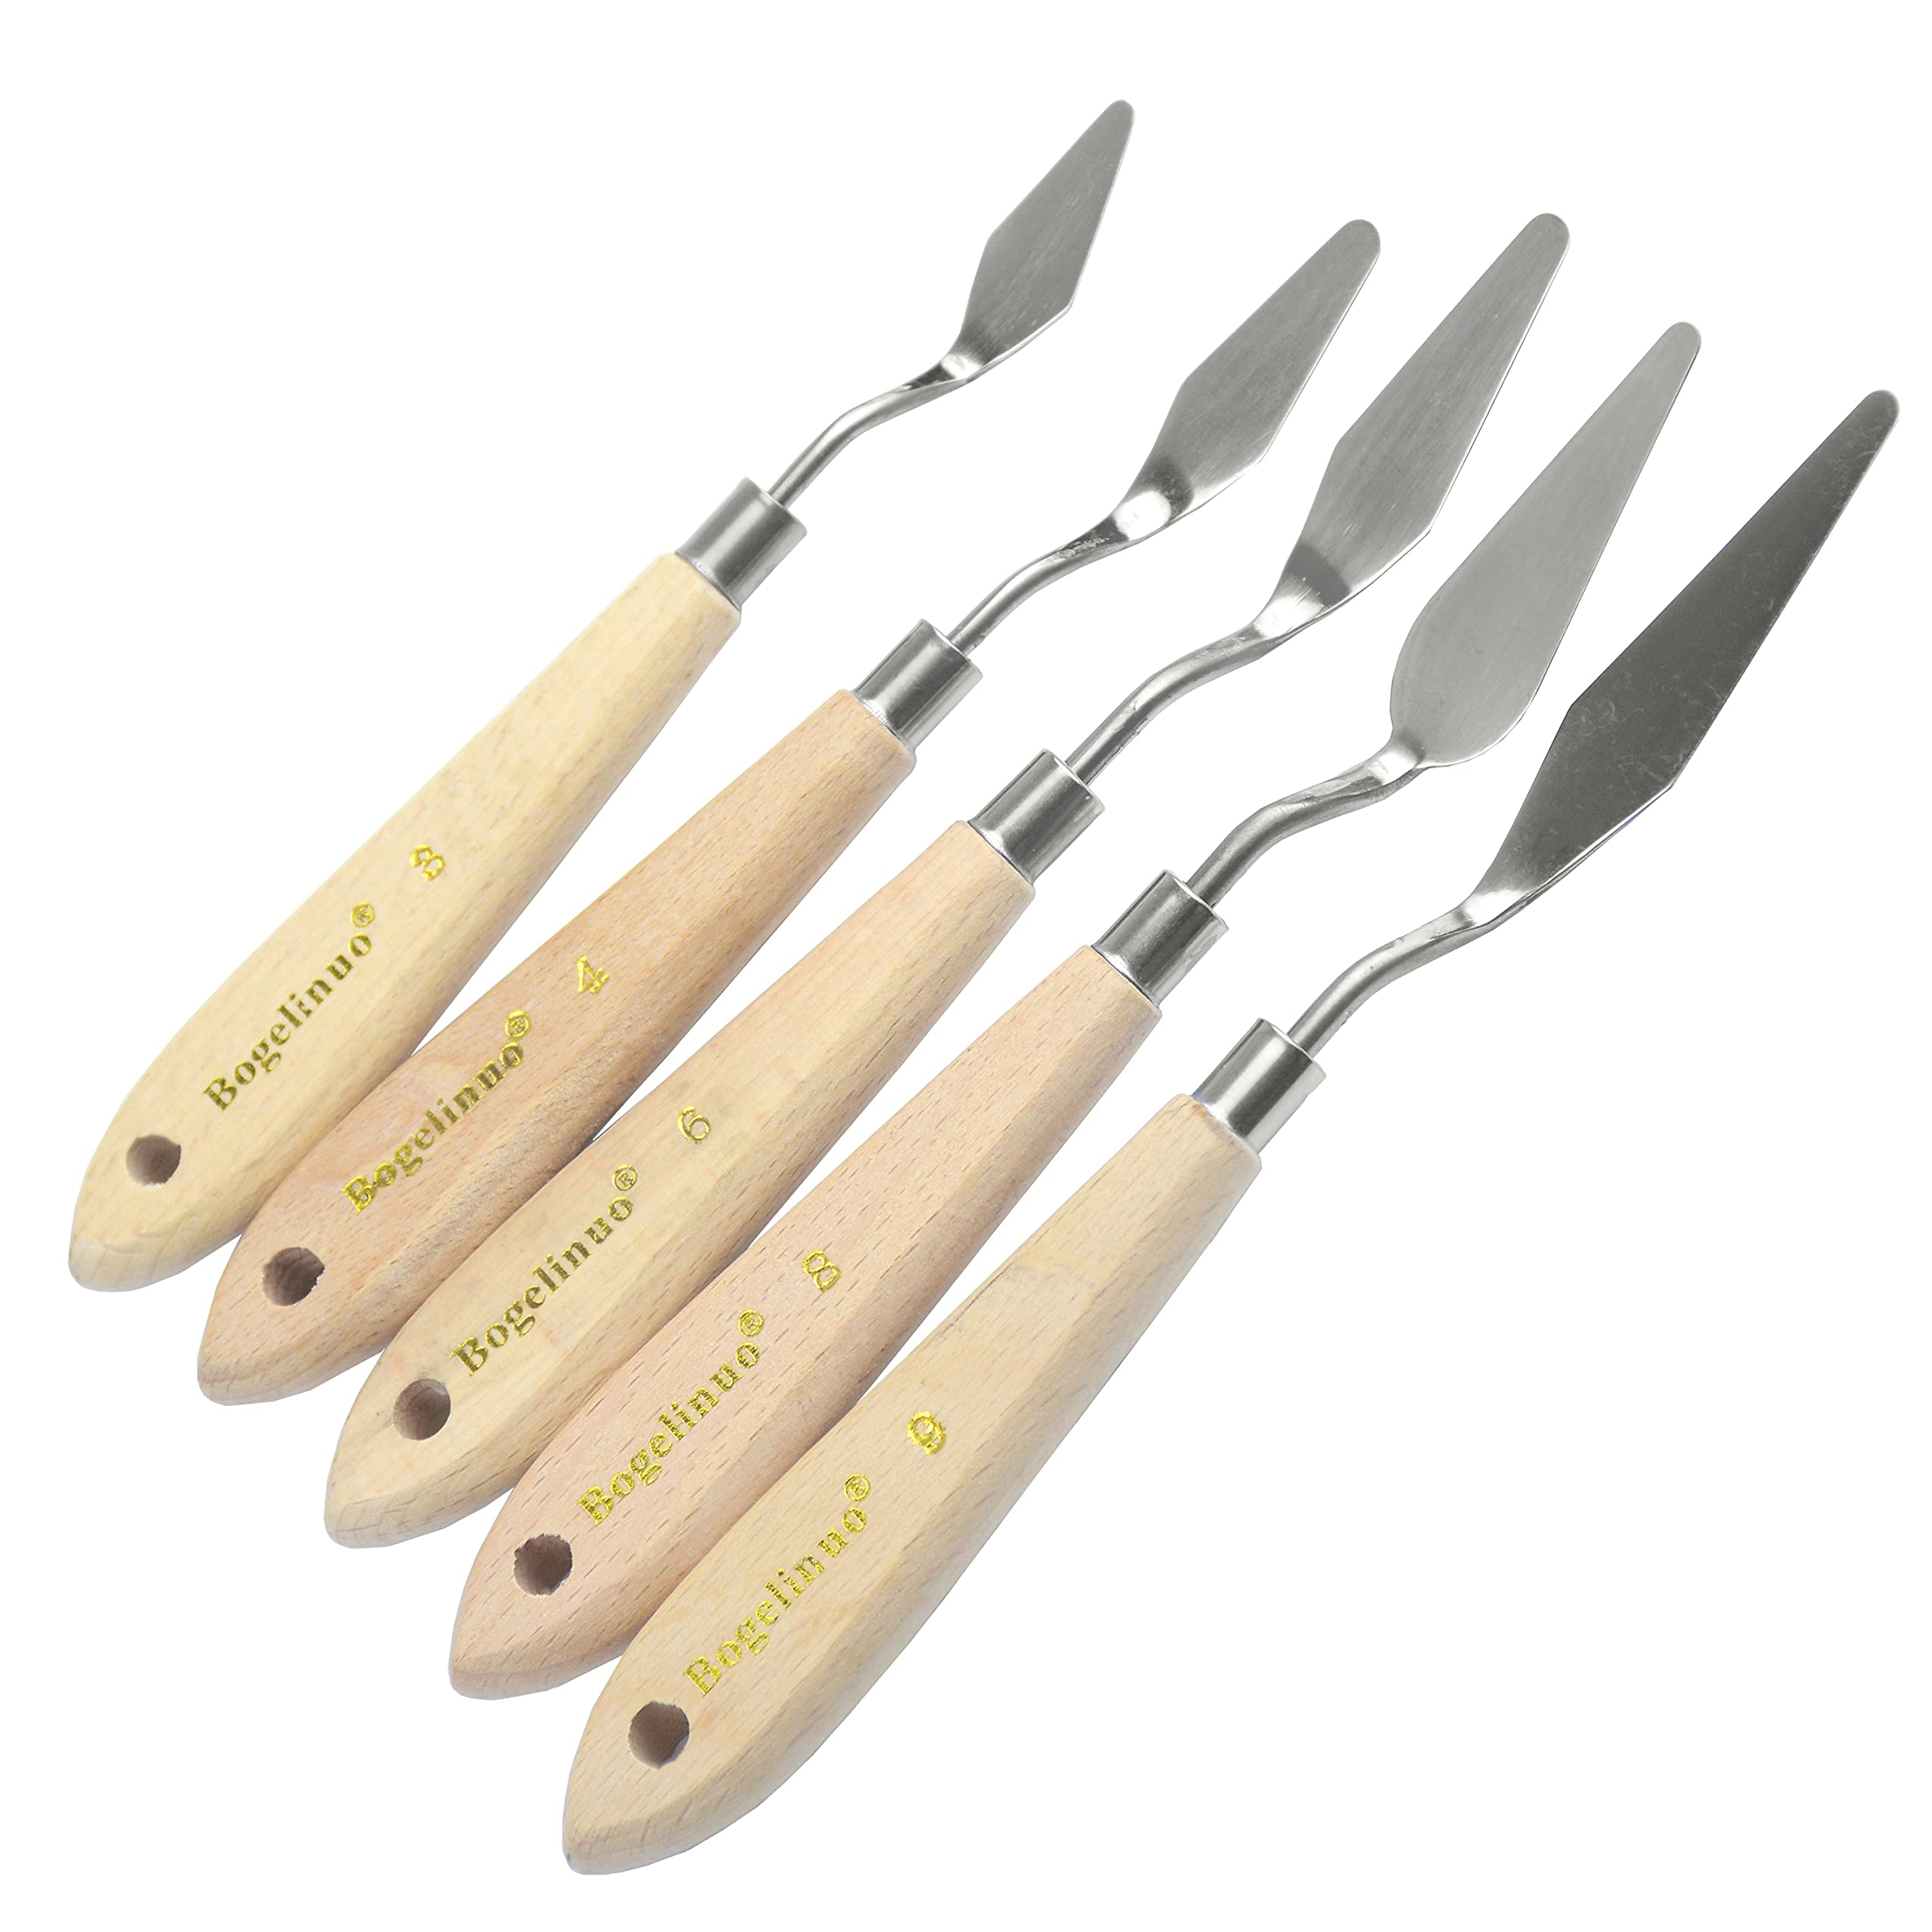 AebDerp 5 pcs Palette Knife Art Tools with Wooden Knife Handle Material for  Painting Canvas & Palette Knife for Acrylic Painting